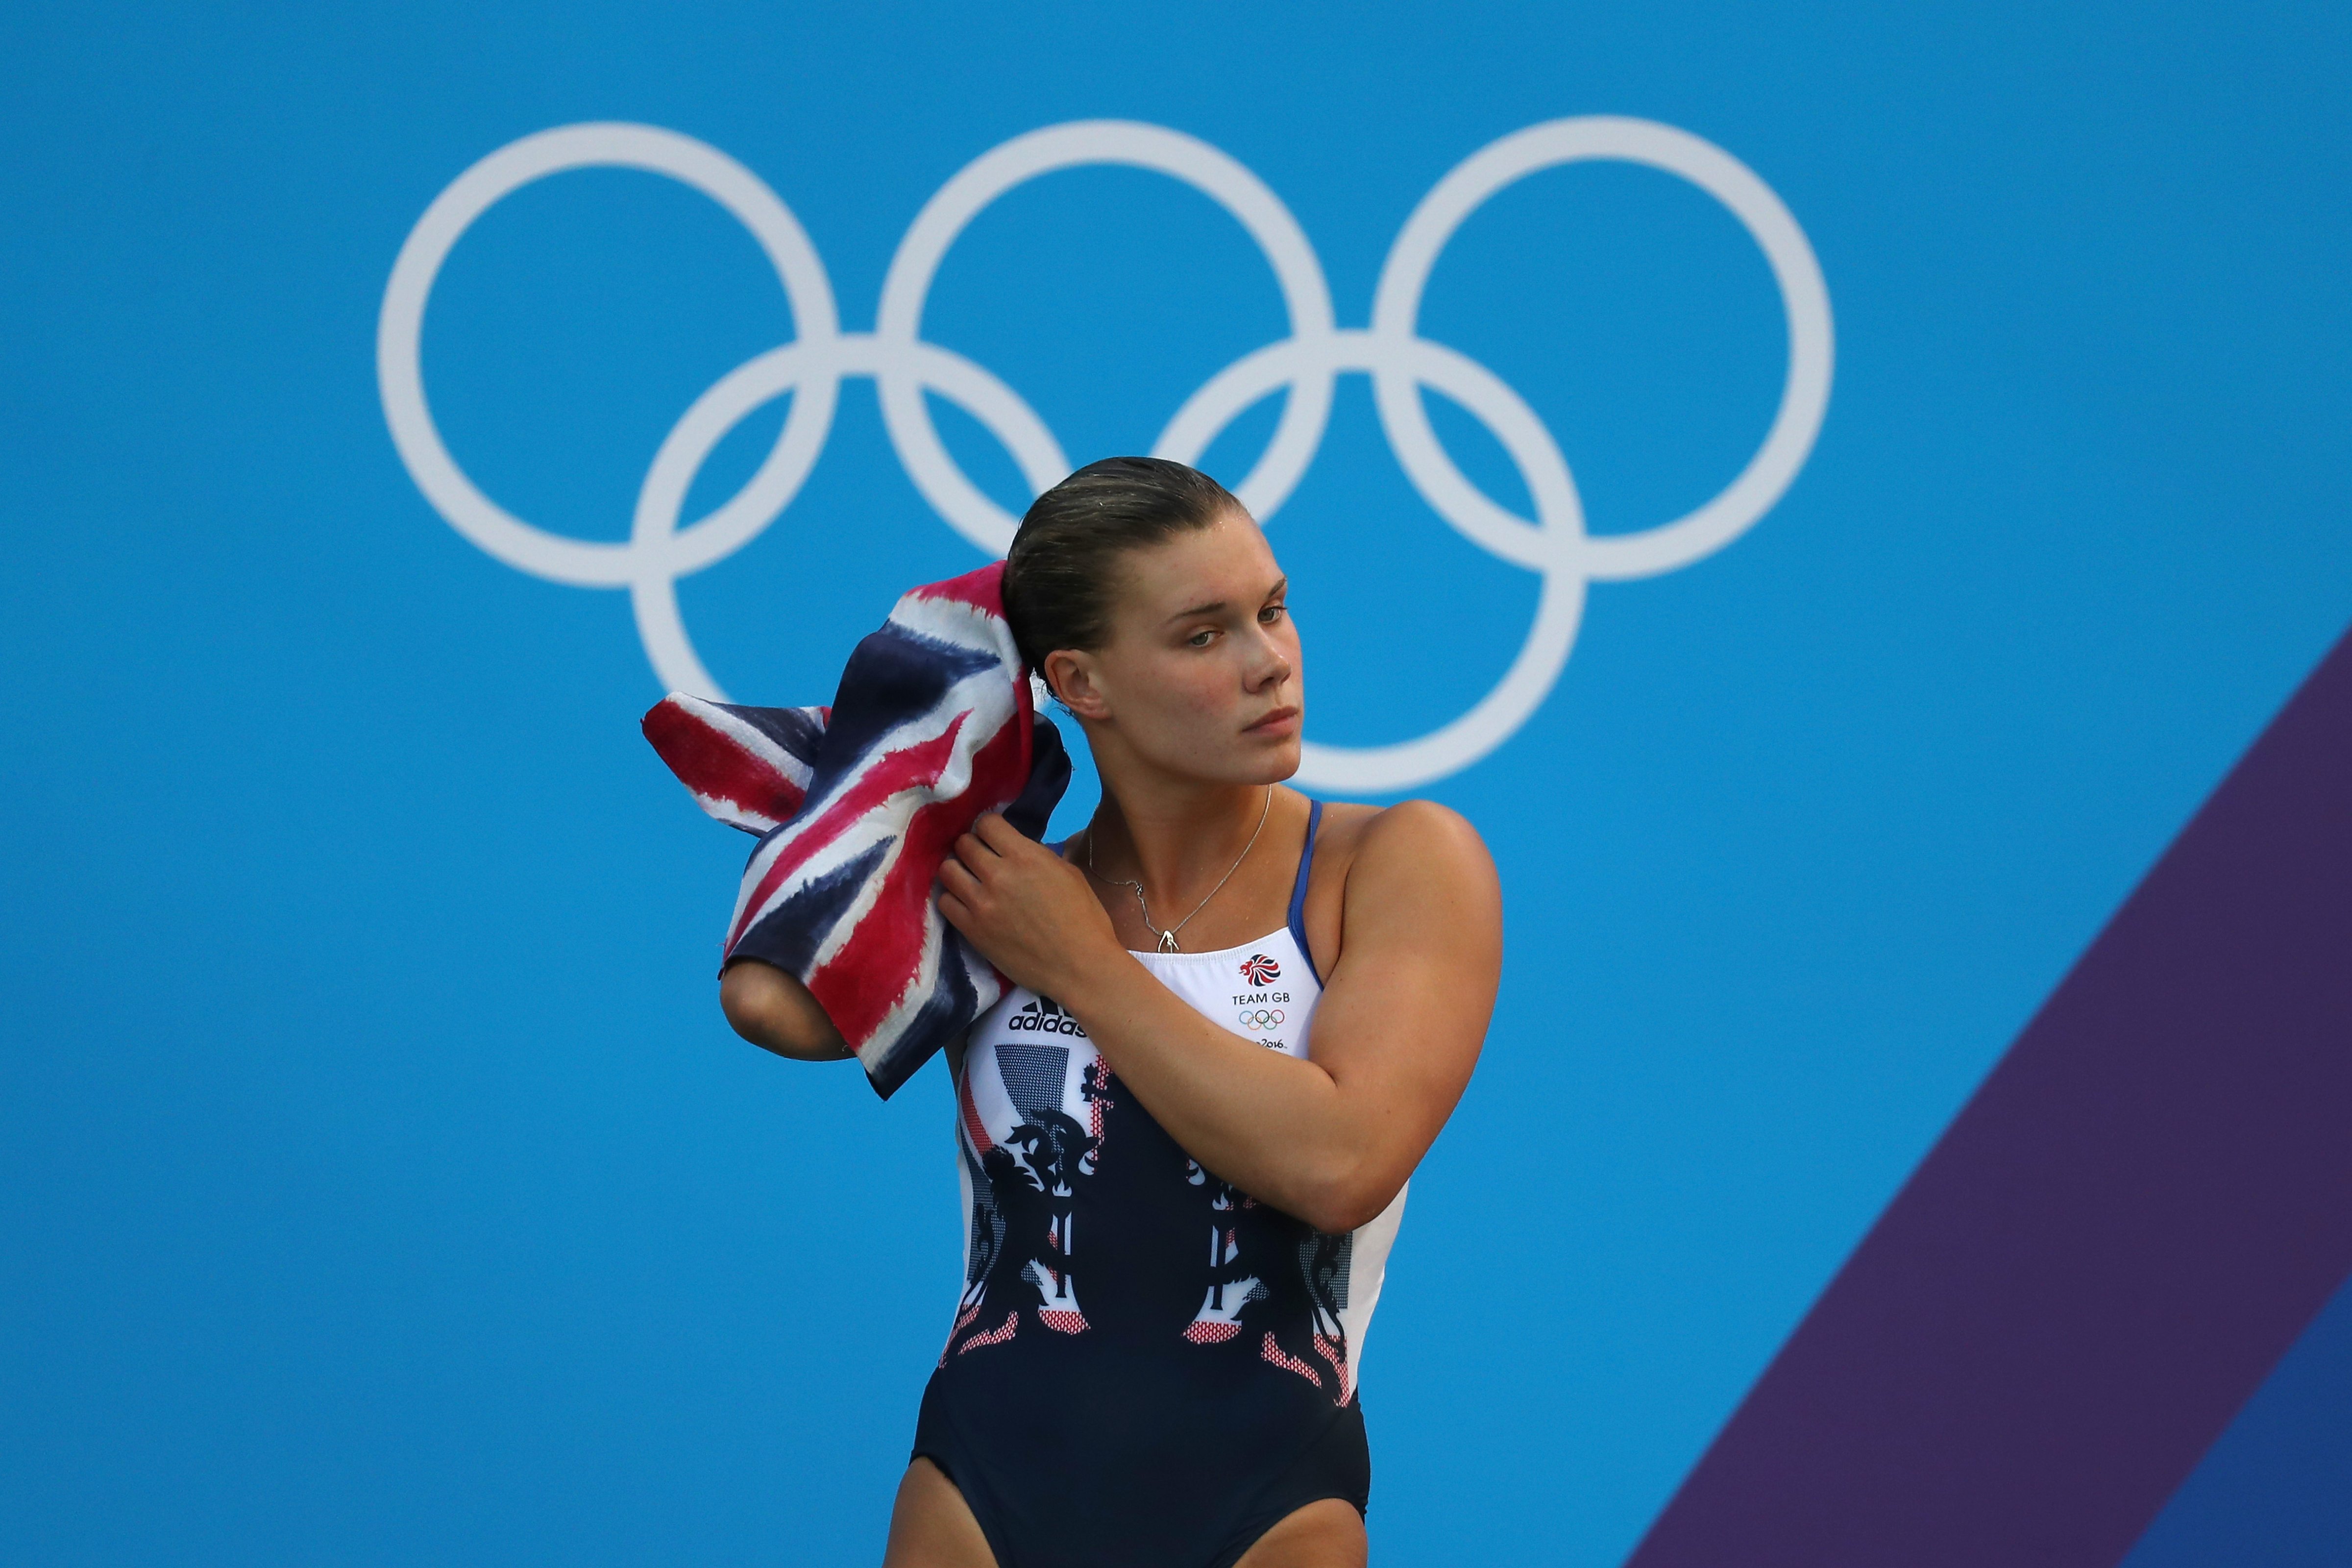 Grace Reid of Great Britain on Day 8 of the Rio 2016 Olympic Games, on August 13, 2016. (Rob Carr—Getty Images)